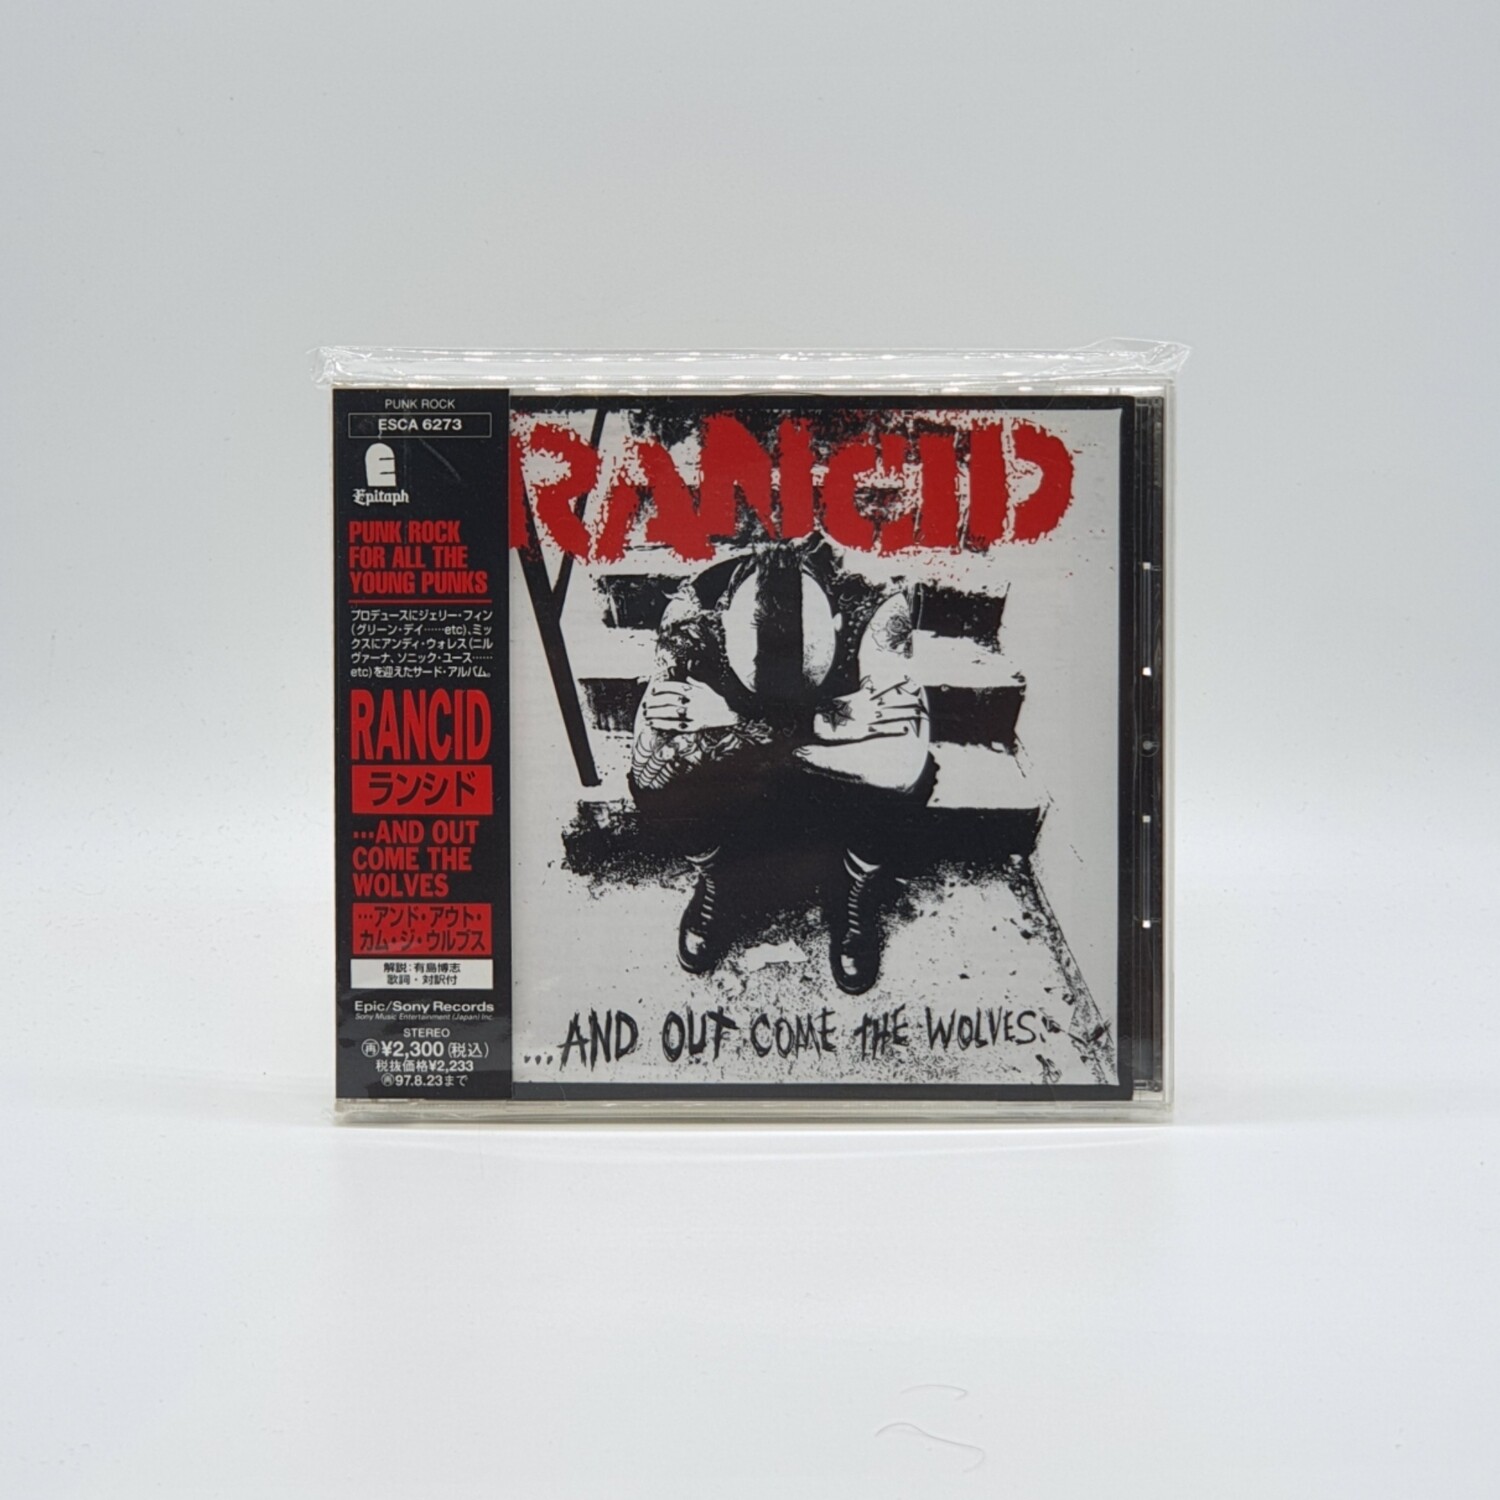 [USED] RANCID -...AND OUT COME THE WOLVES- CD (JAPAN PRESS)